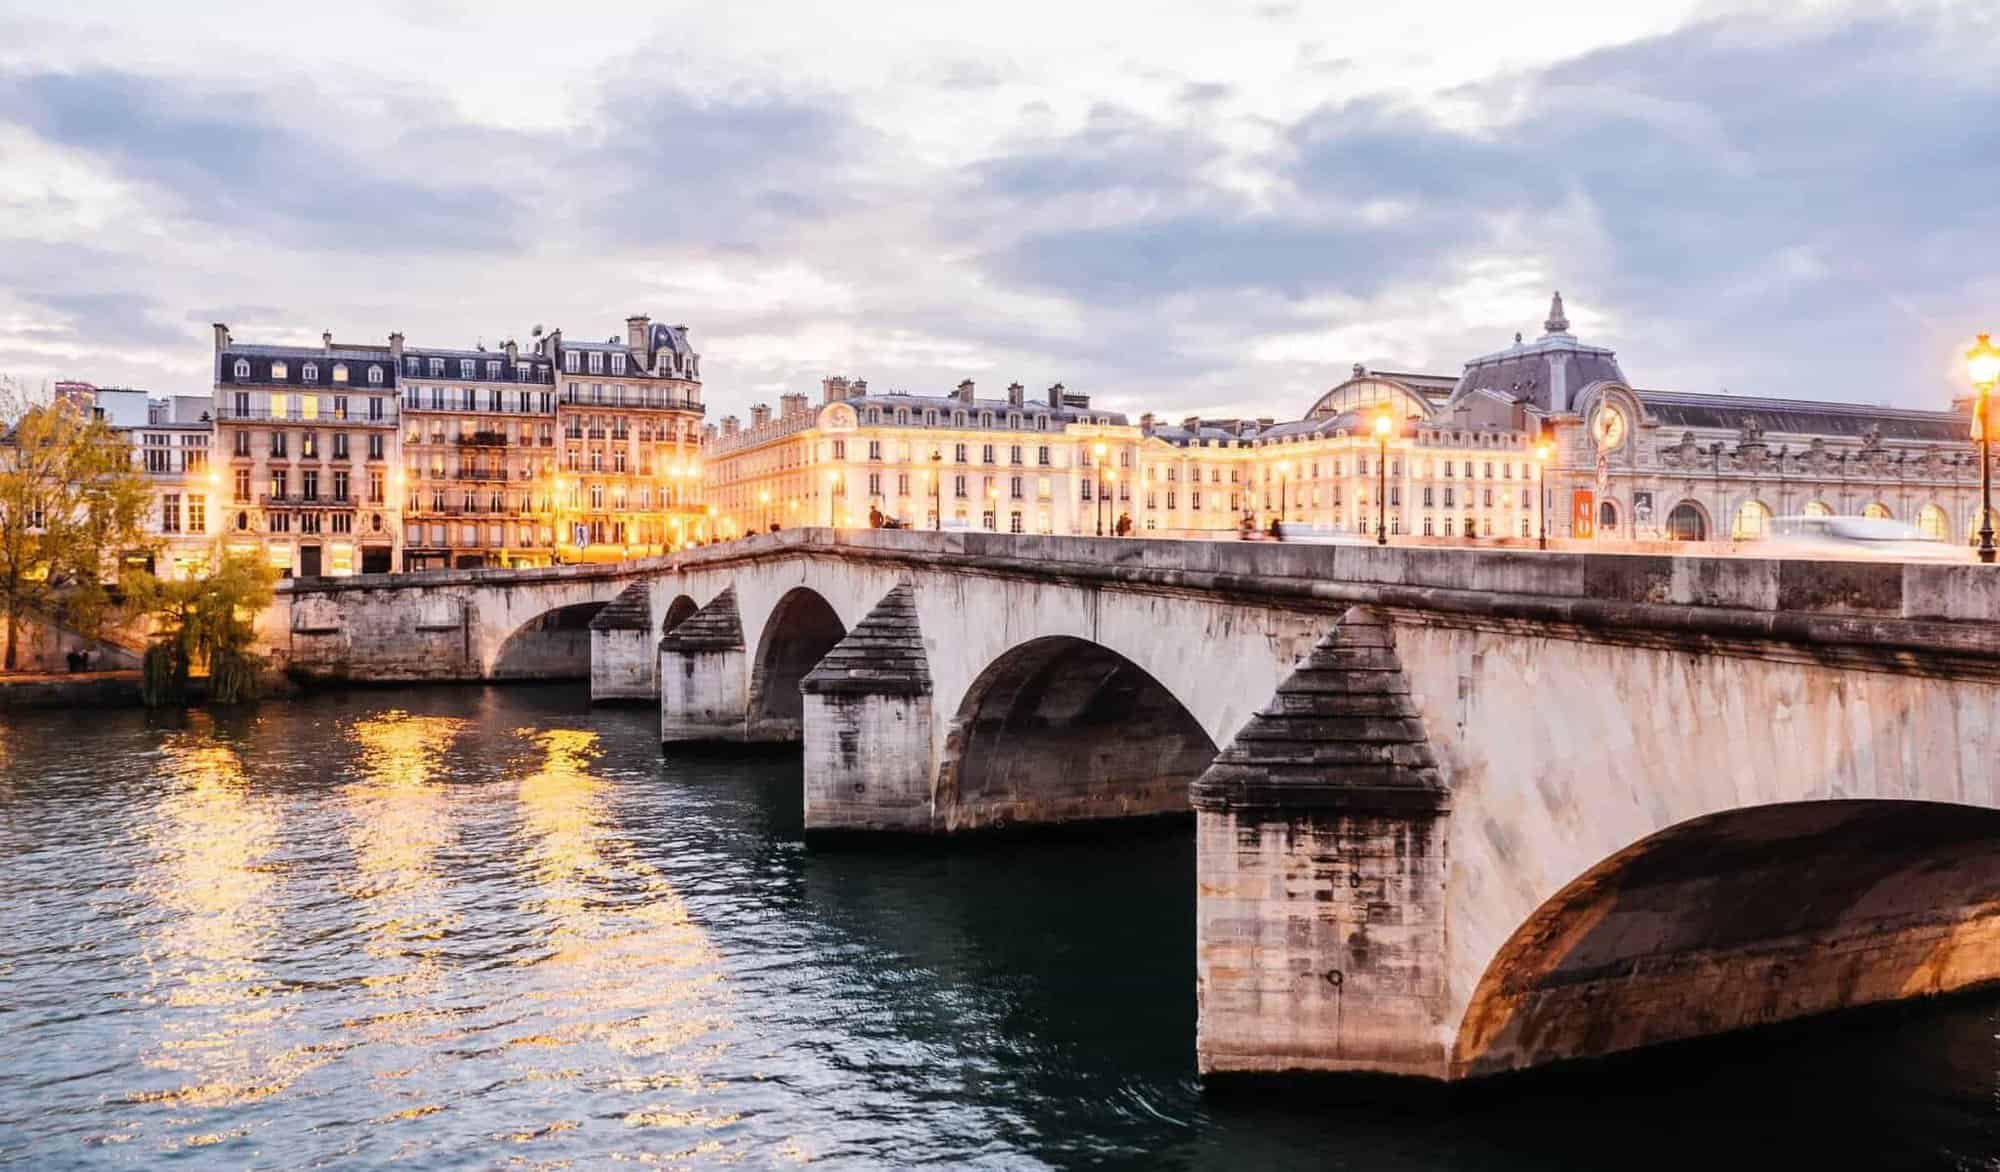 The Pont Royal bridge on the river seine and surrounding Parisian buildings during sunset.